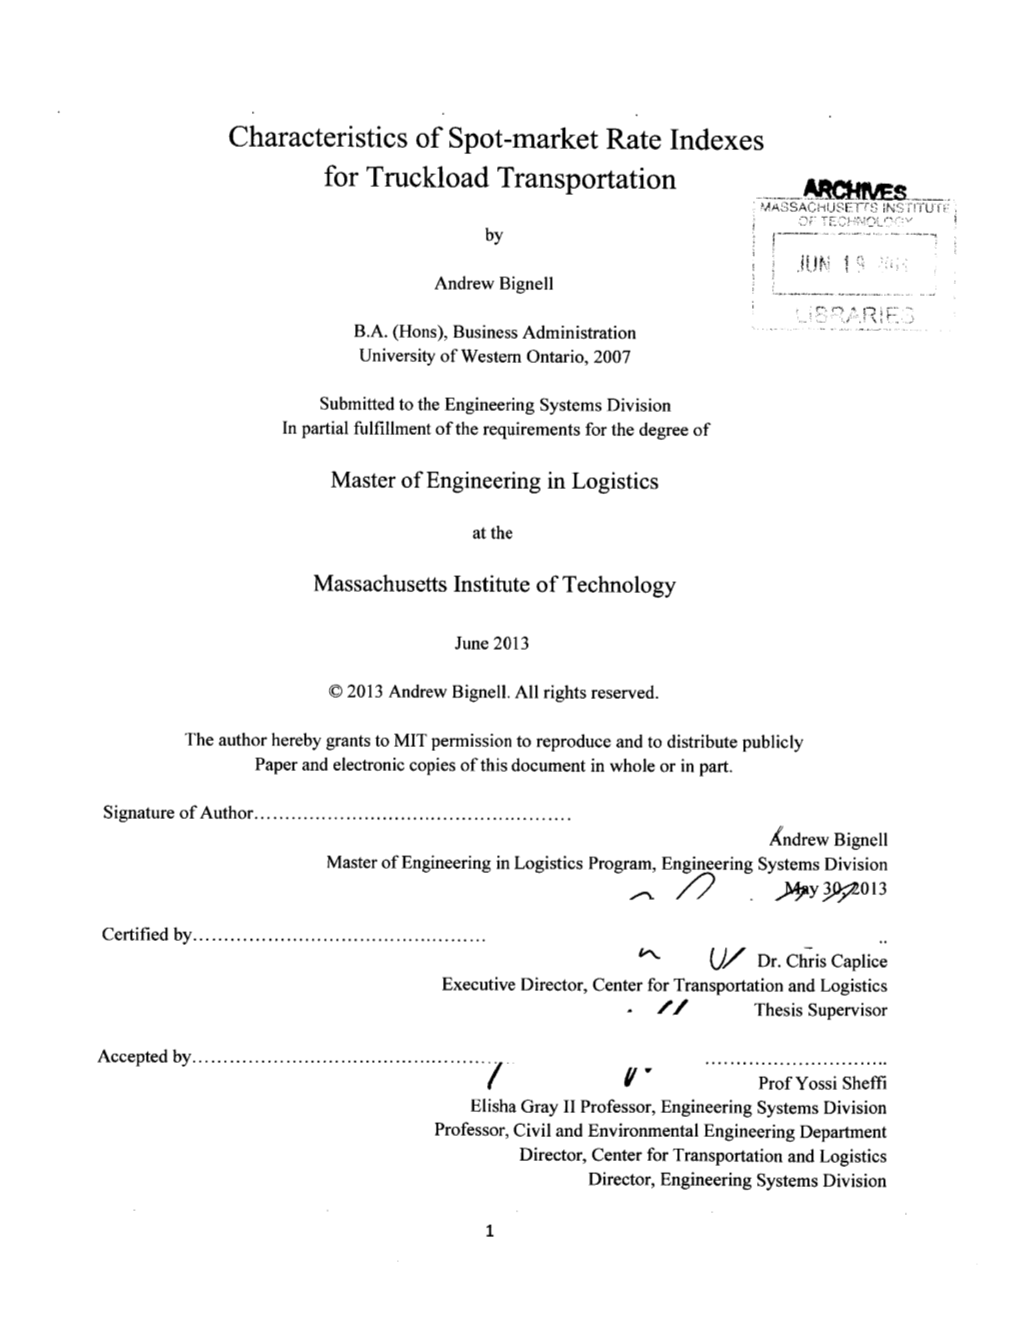 Characteristics of Spot-Market Rate Indexes for Truckload Transportation ASSACHS NSTTUT By